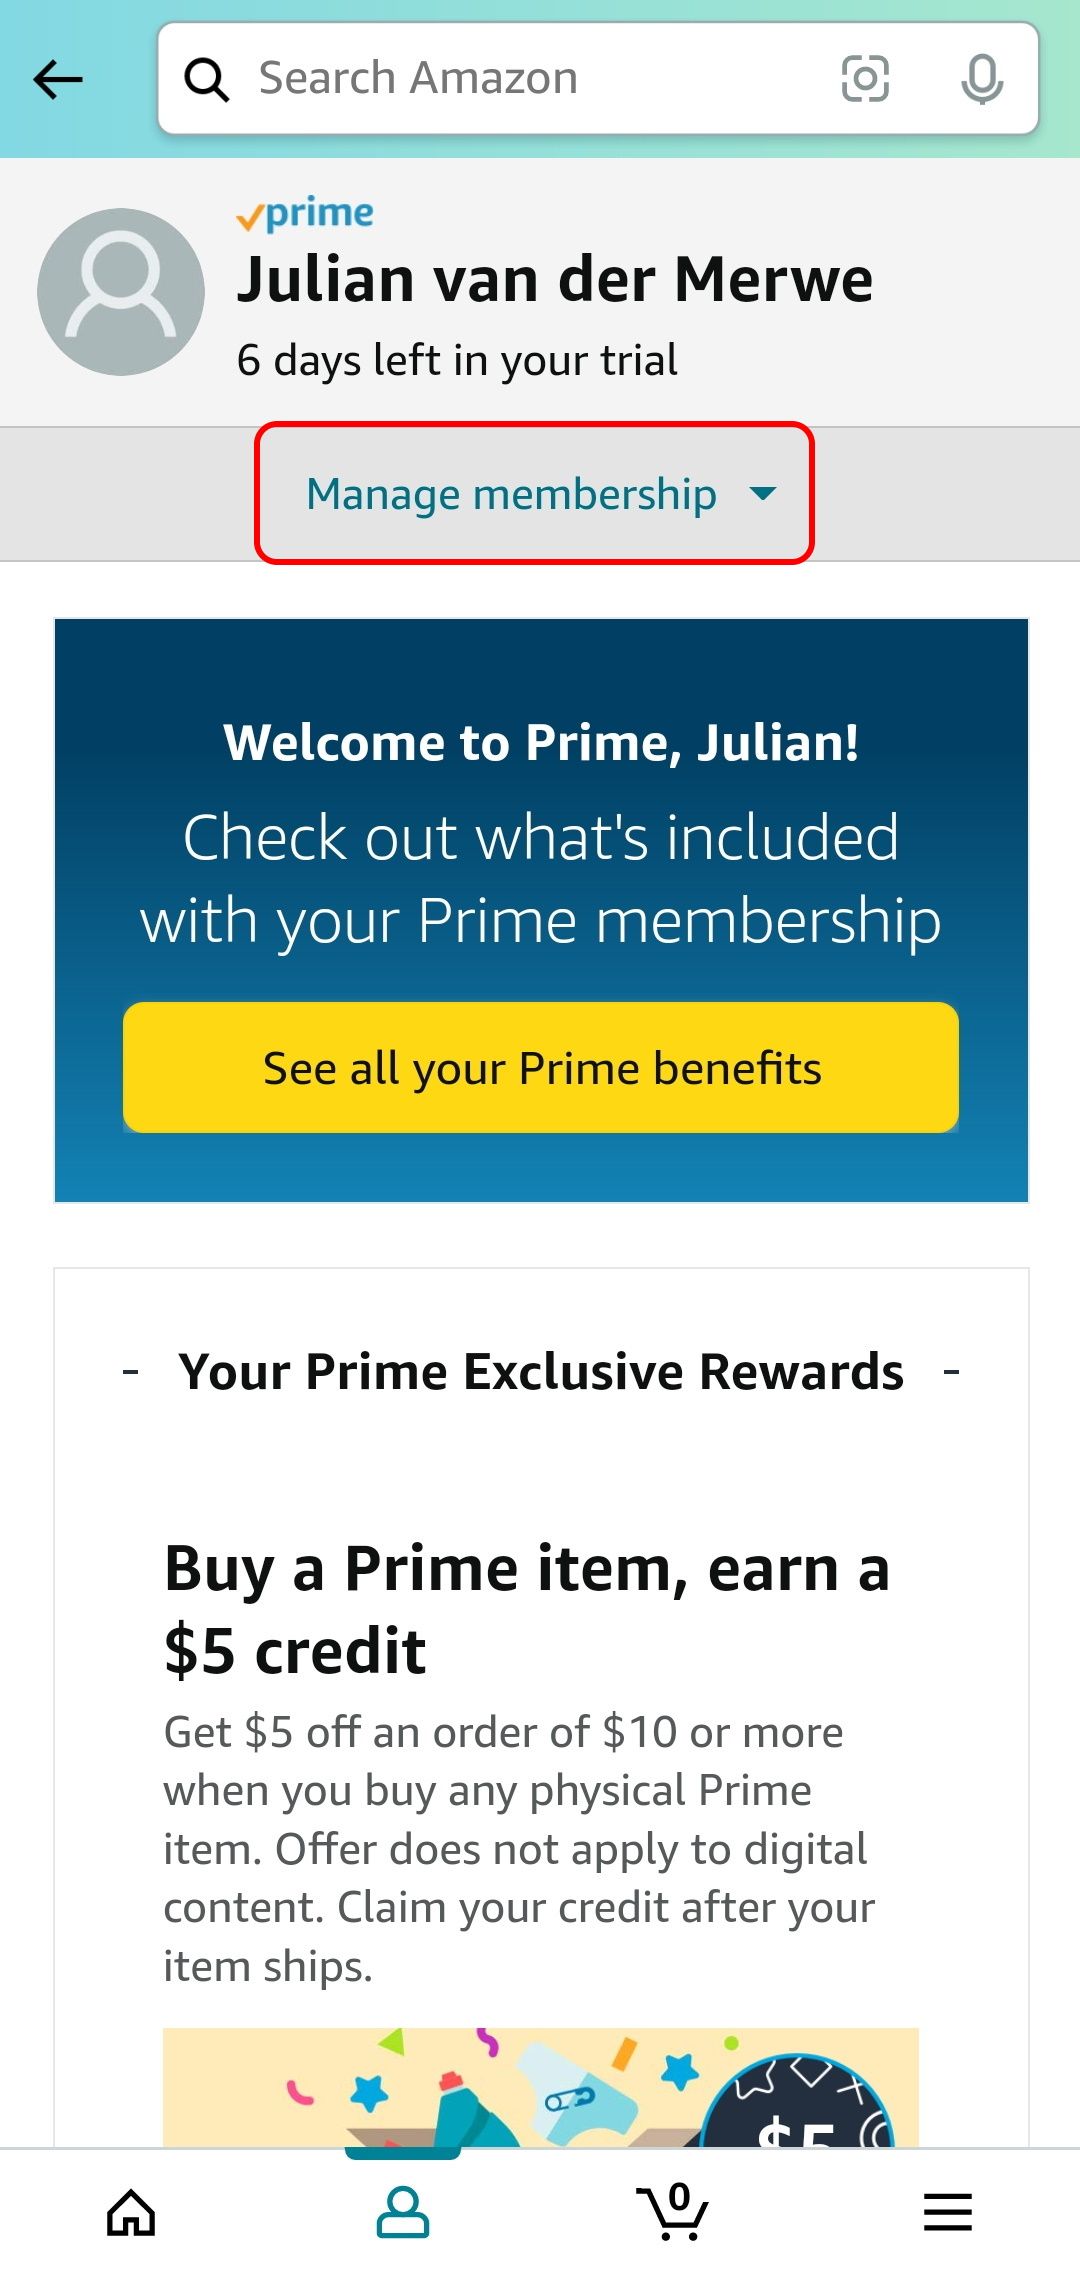 How To Cancel  Prime Subscription And Get A Refund?